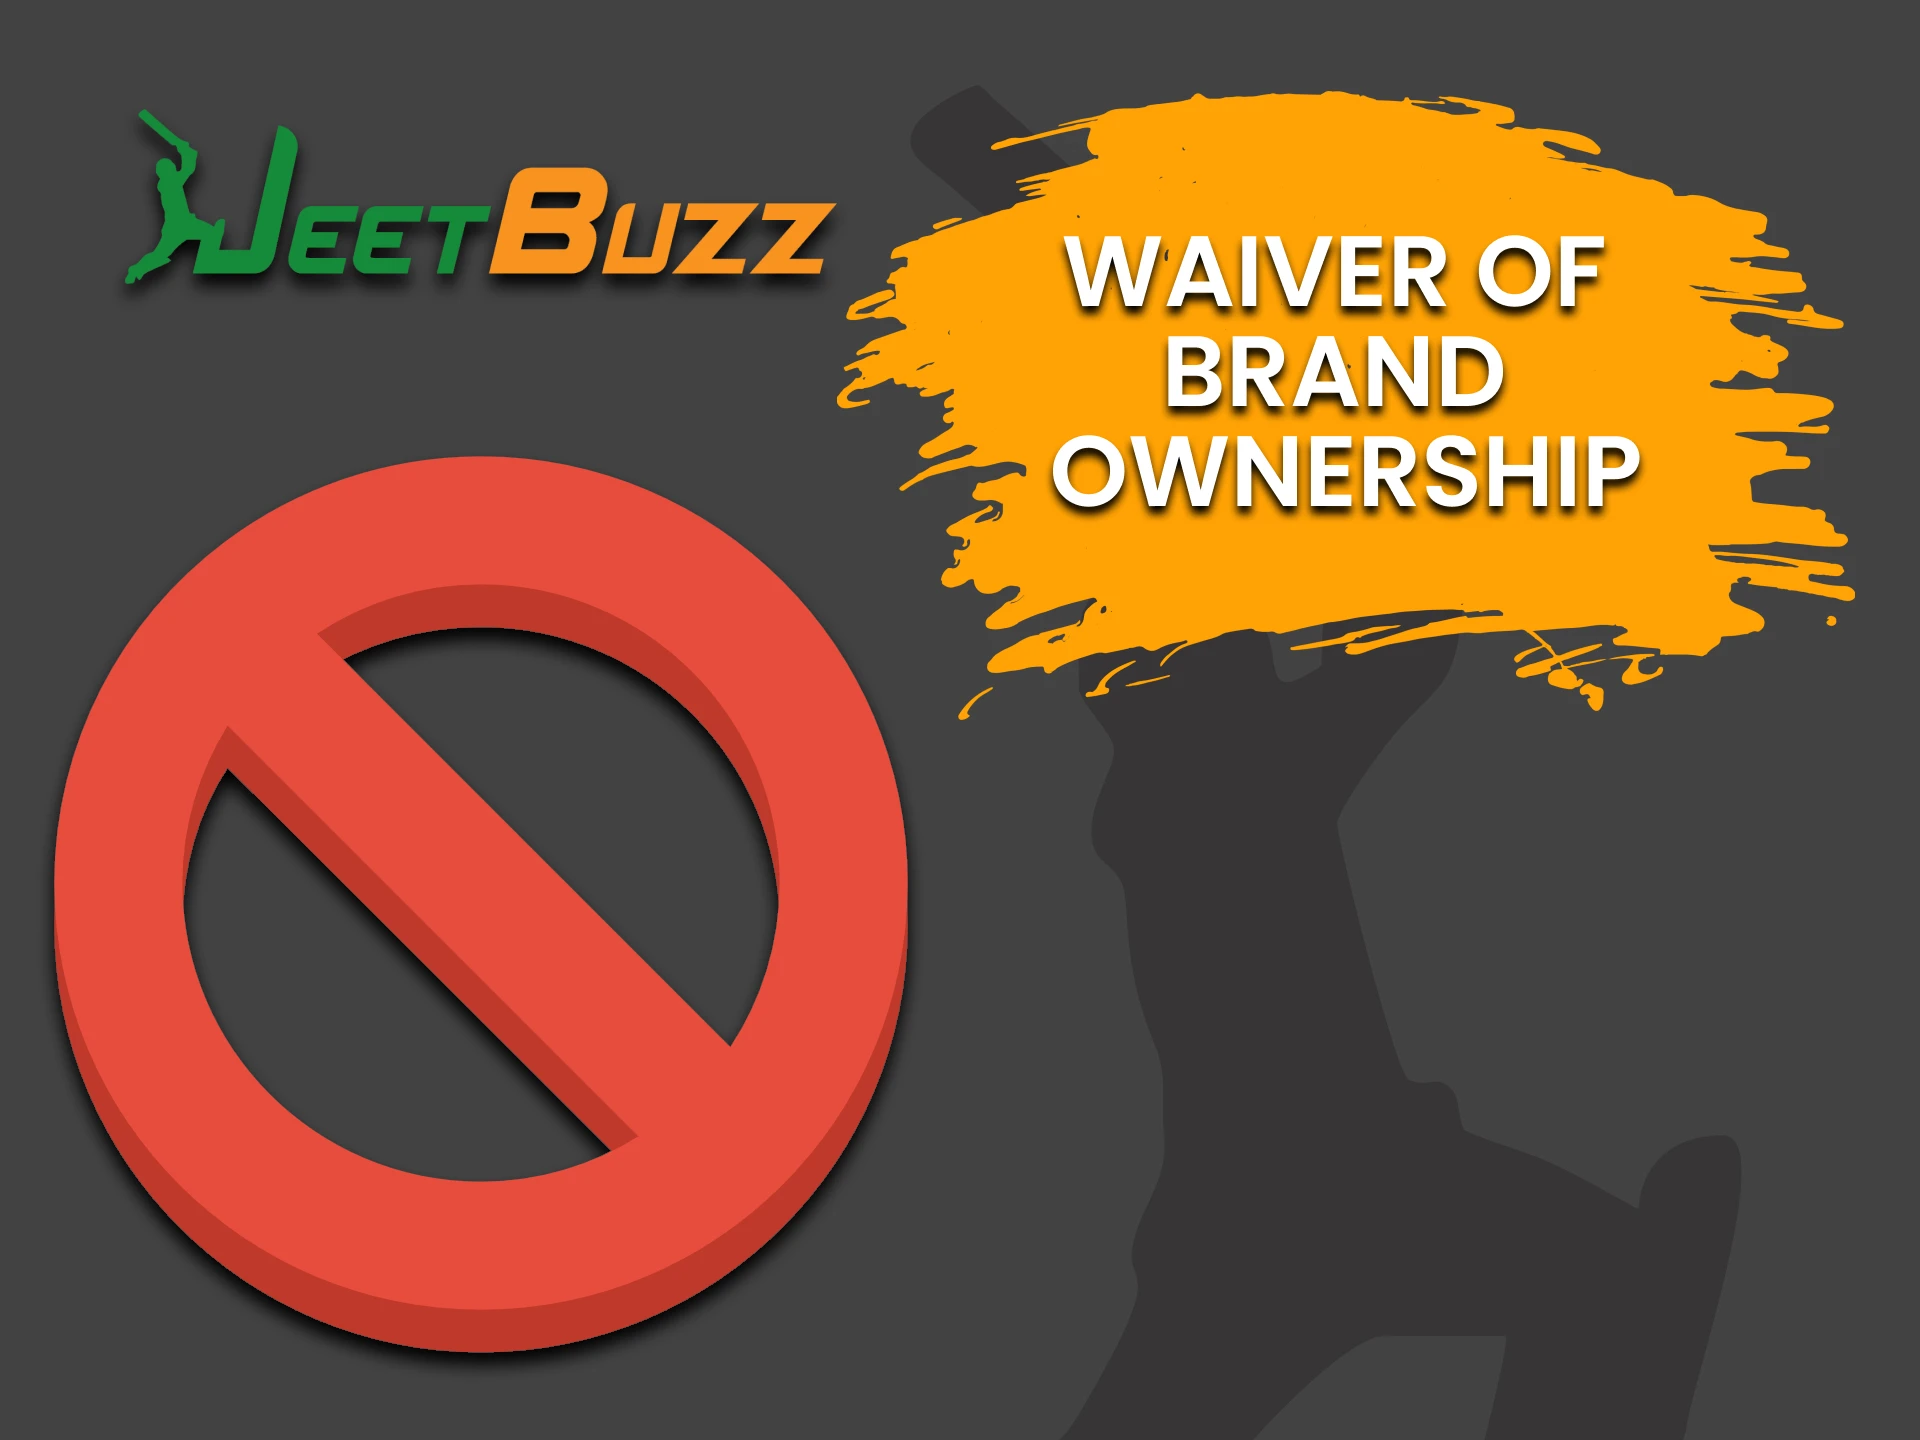 We will tell you who owns the JeetBuzz site.